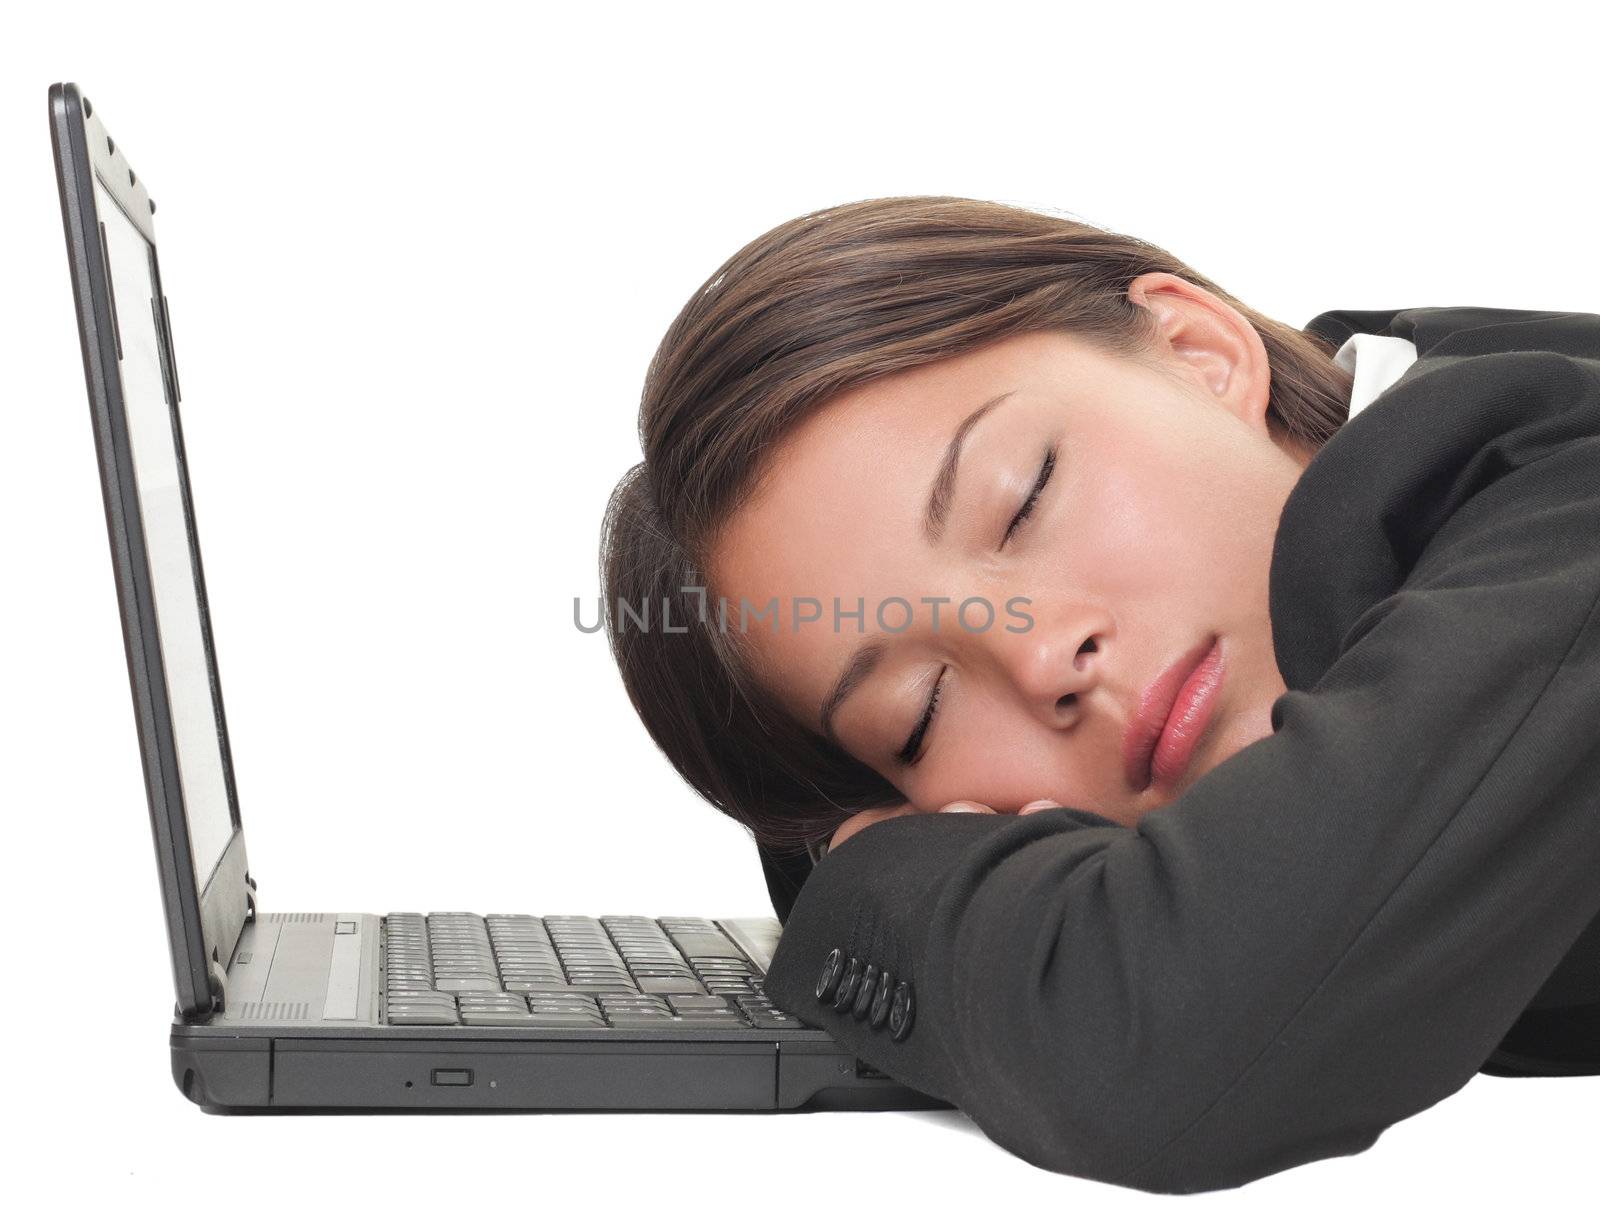 Woman sleeping on laptop taking a power nap during work. Isolated on white background.